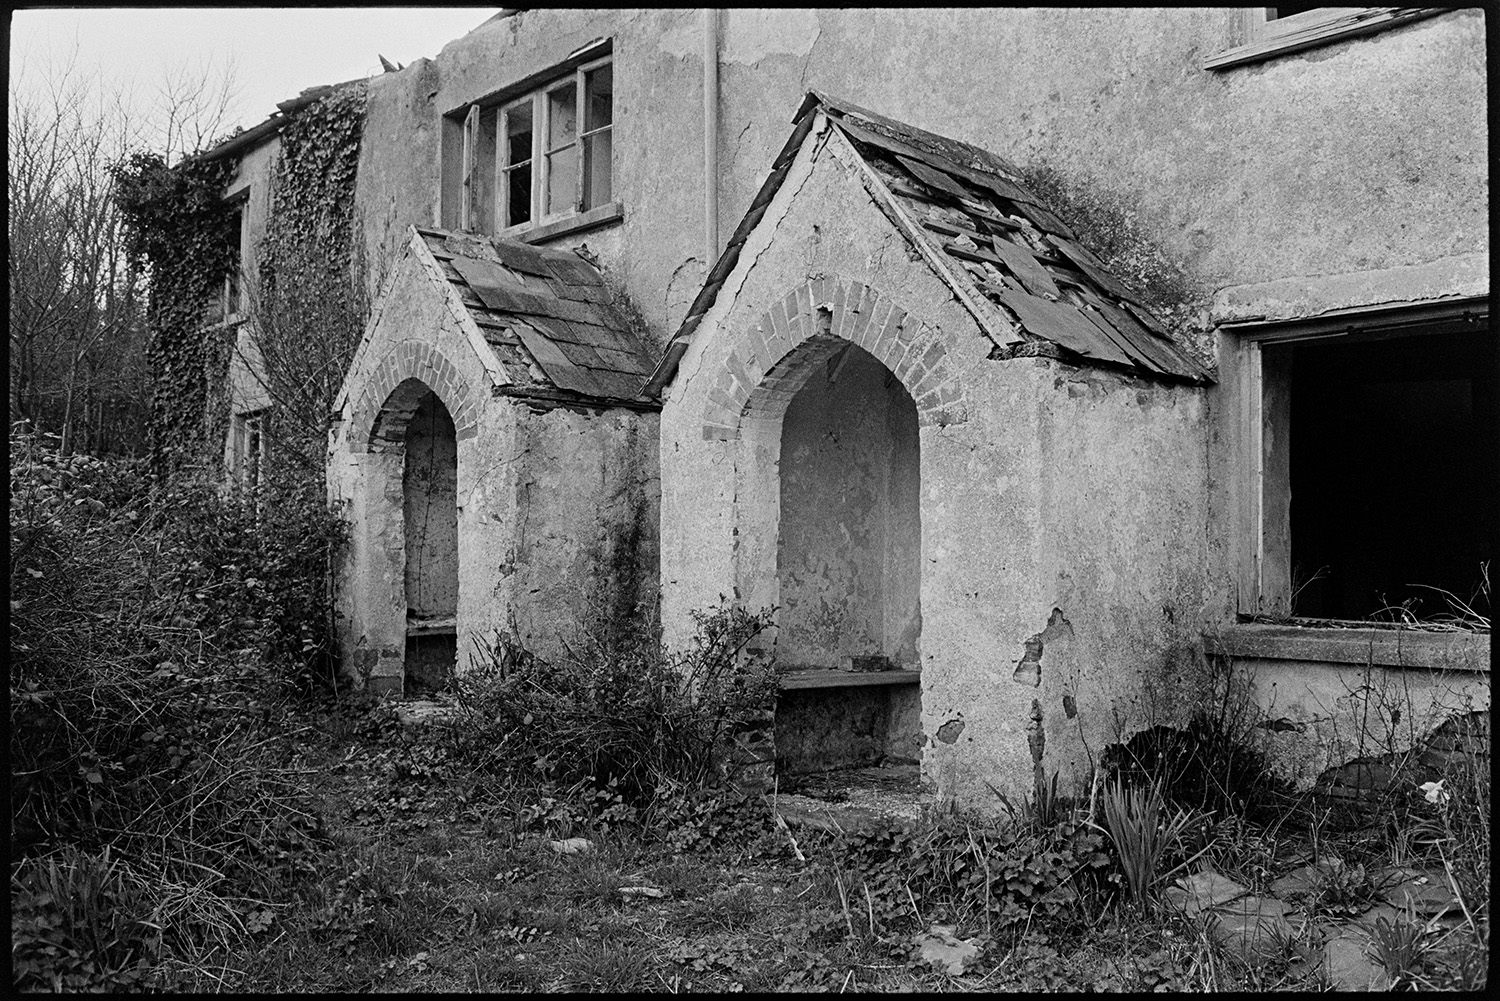 Overgrown and derelict cottages with no roof. The slates are falling off the roofs of the porches.